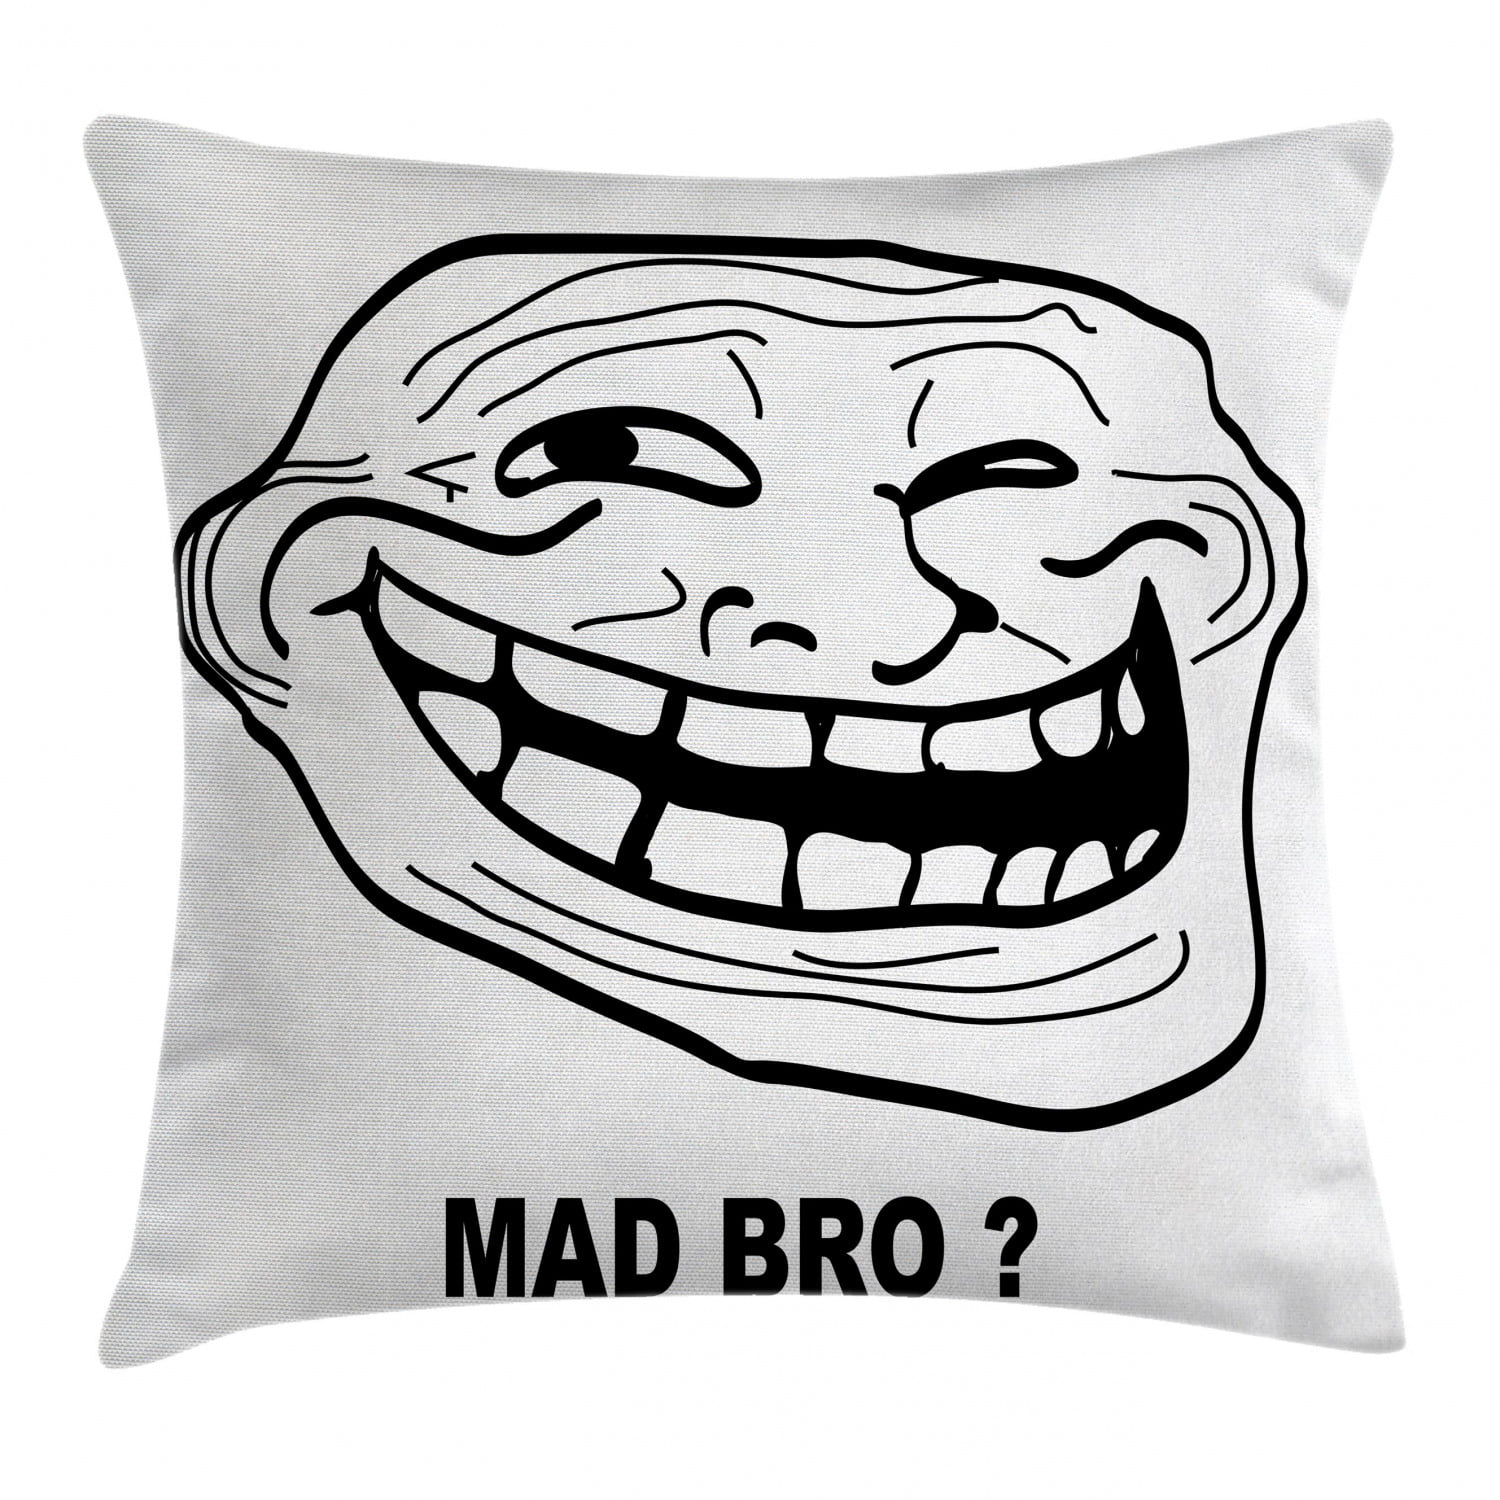 Humor Decor Throw Pillow Cushion Cover, Cartoon Style Troll Face Guy for  Annoying Popular Artful Internet Meme Design, Decorative Square Accent  Pillow Case, 16 X 16 Inches, Black White, by Ambesonne 